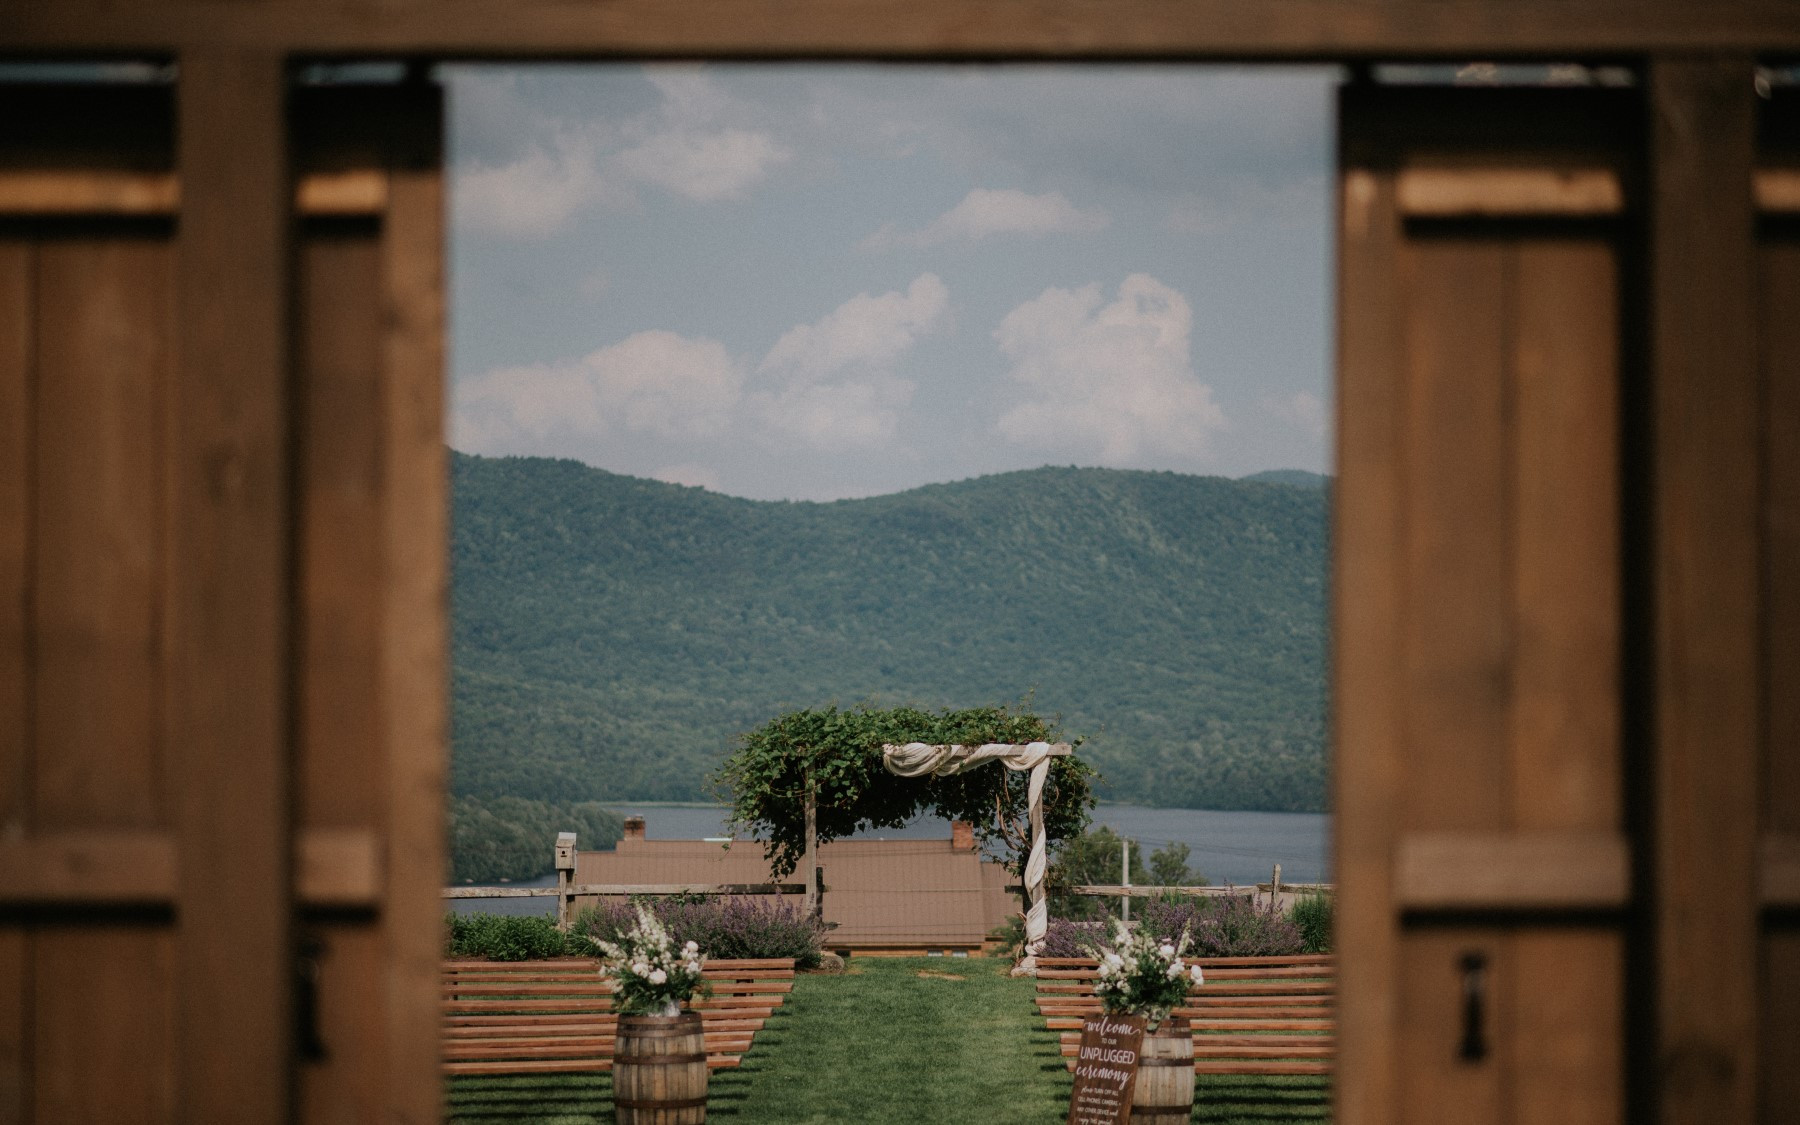 wedding knoll during the summer being looked at through barn doors.